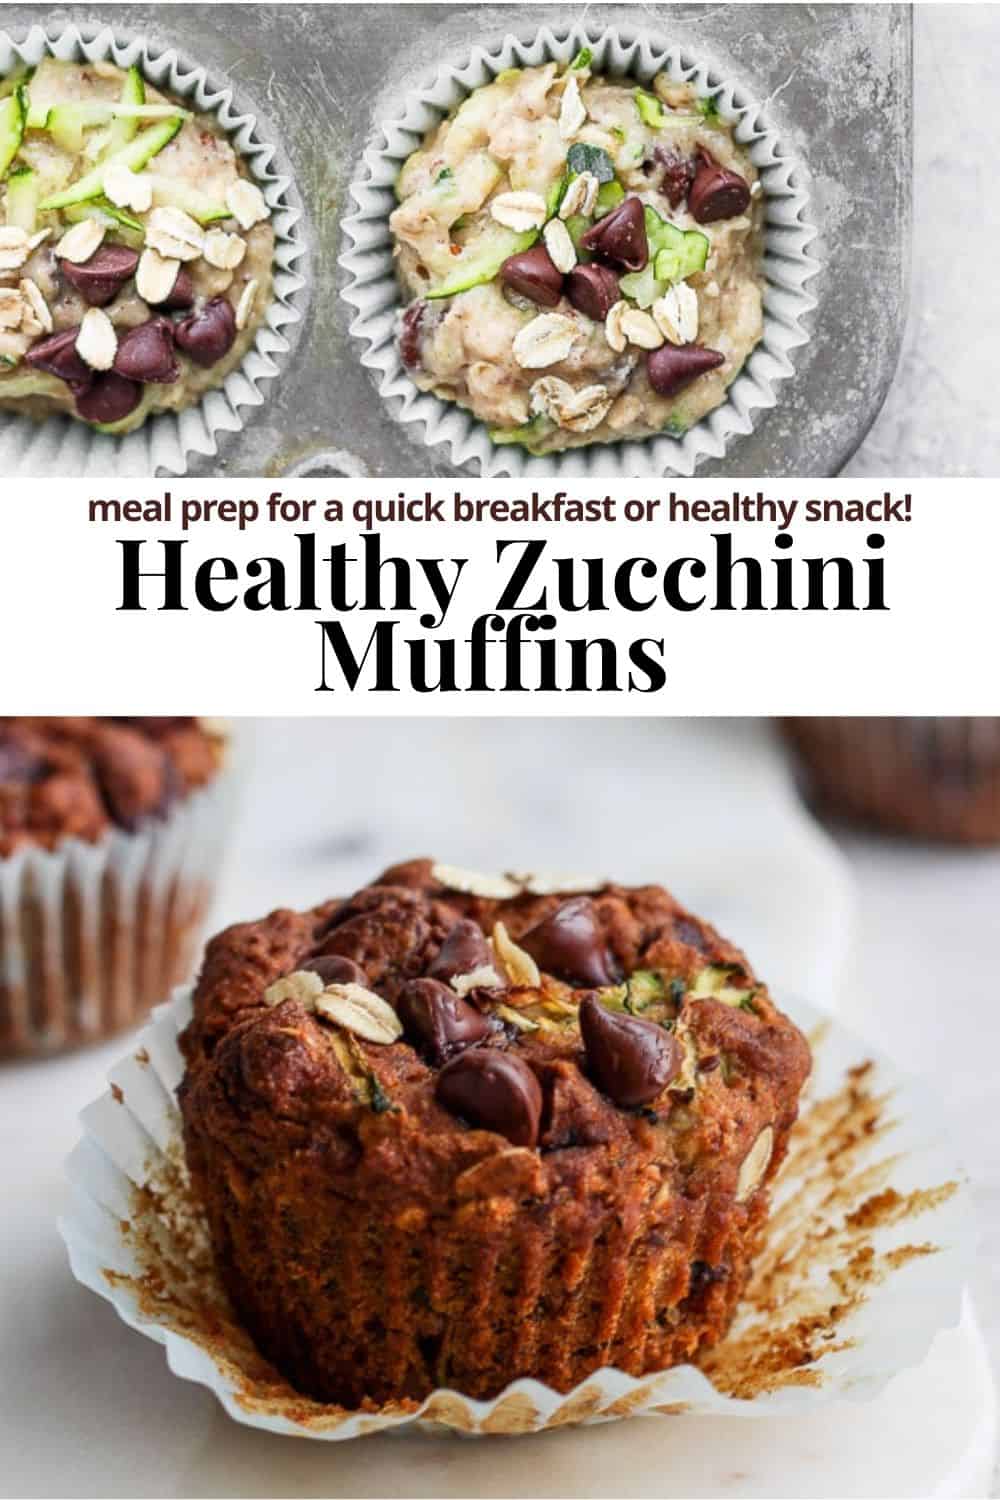 Pinterest image for healthy zucchini muffins.